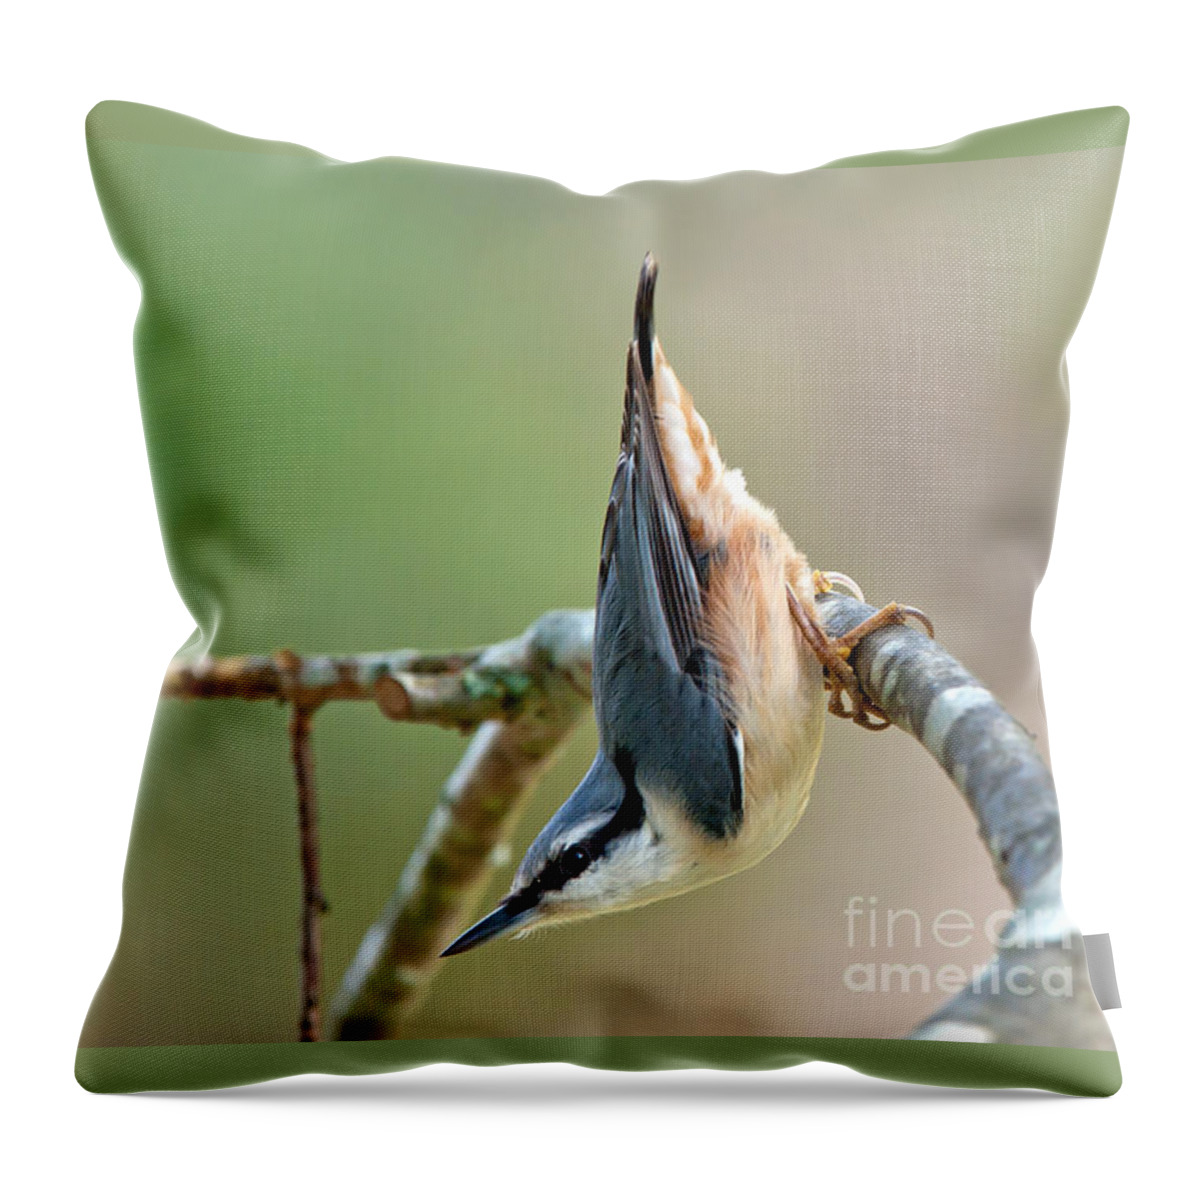 Breakneck - The Nuthatch Throw Pillow featuring the photograph Breakneck - the Nuthatch by Torbjorn Swenelius